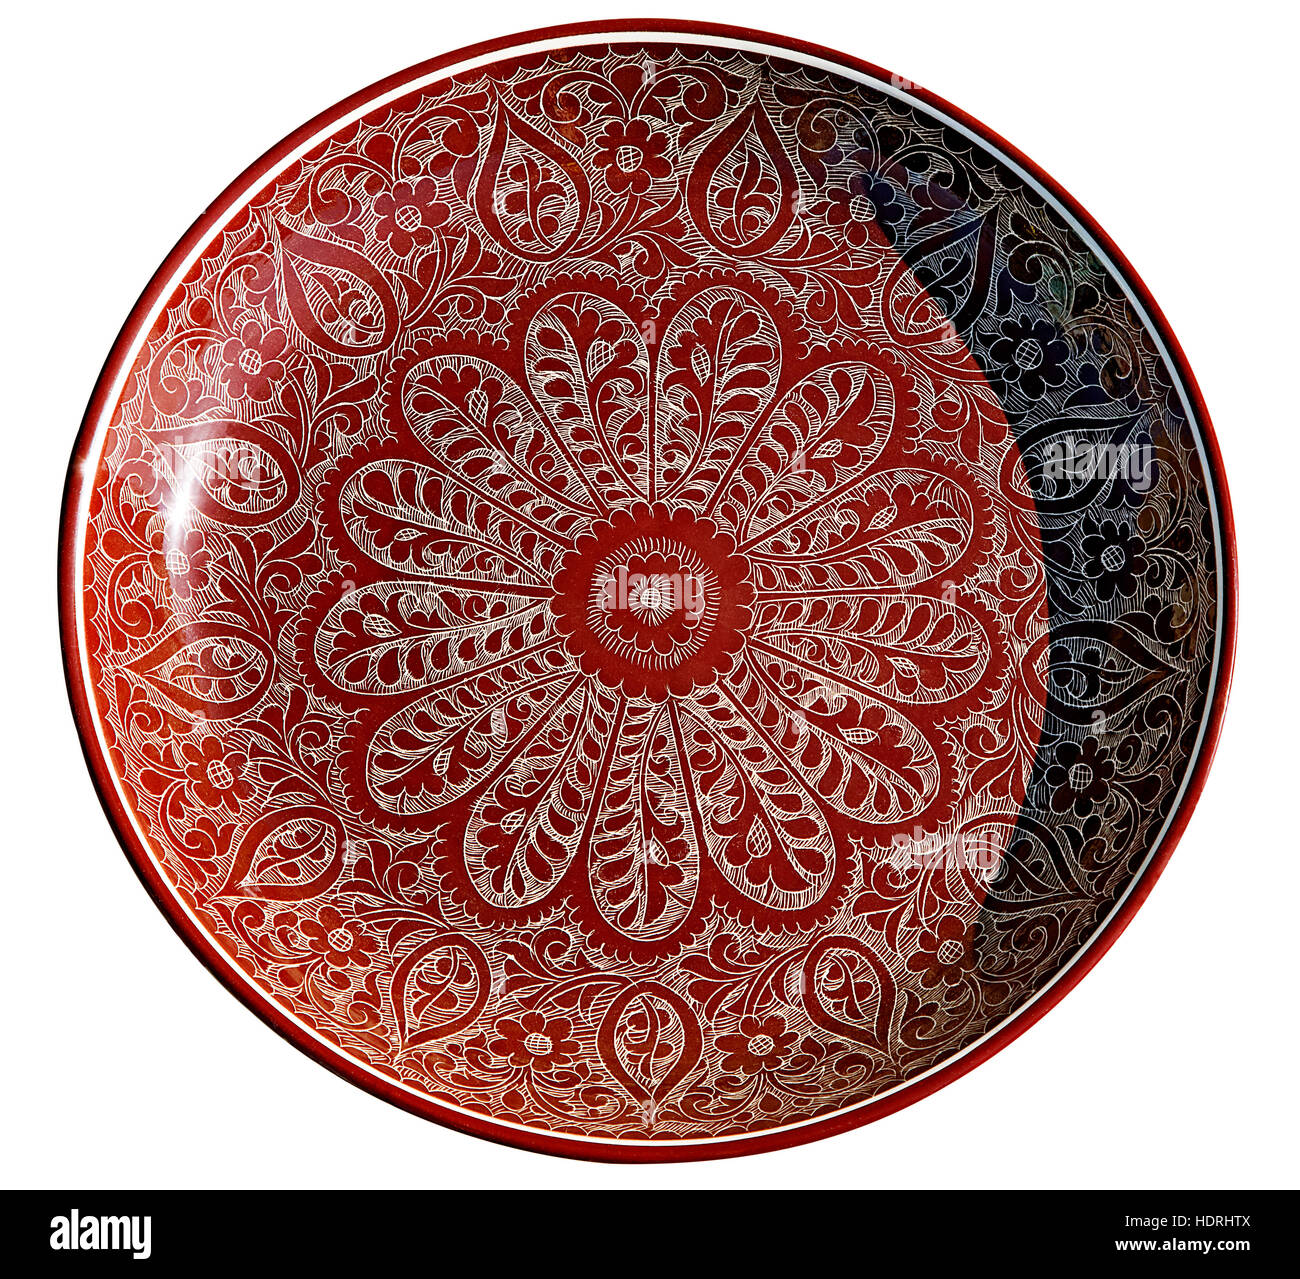 Plate with traditional uzbek ornament, isolated over white Stock Photo